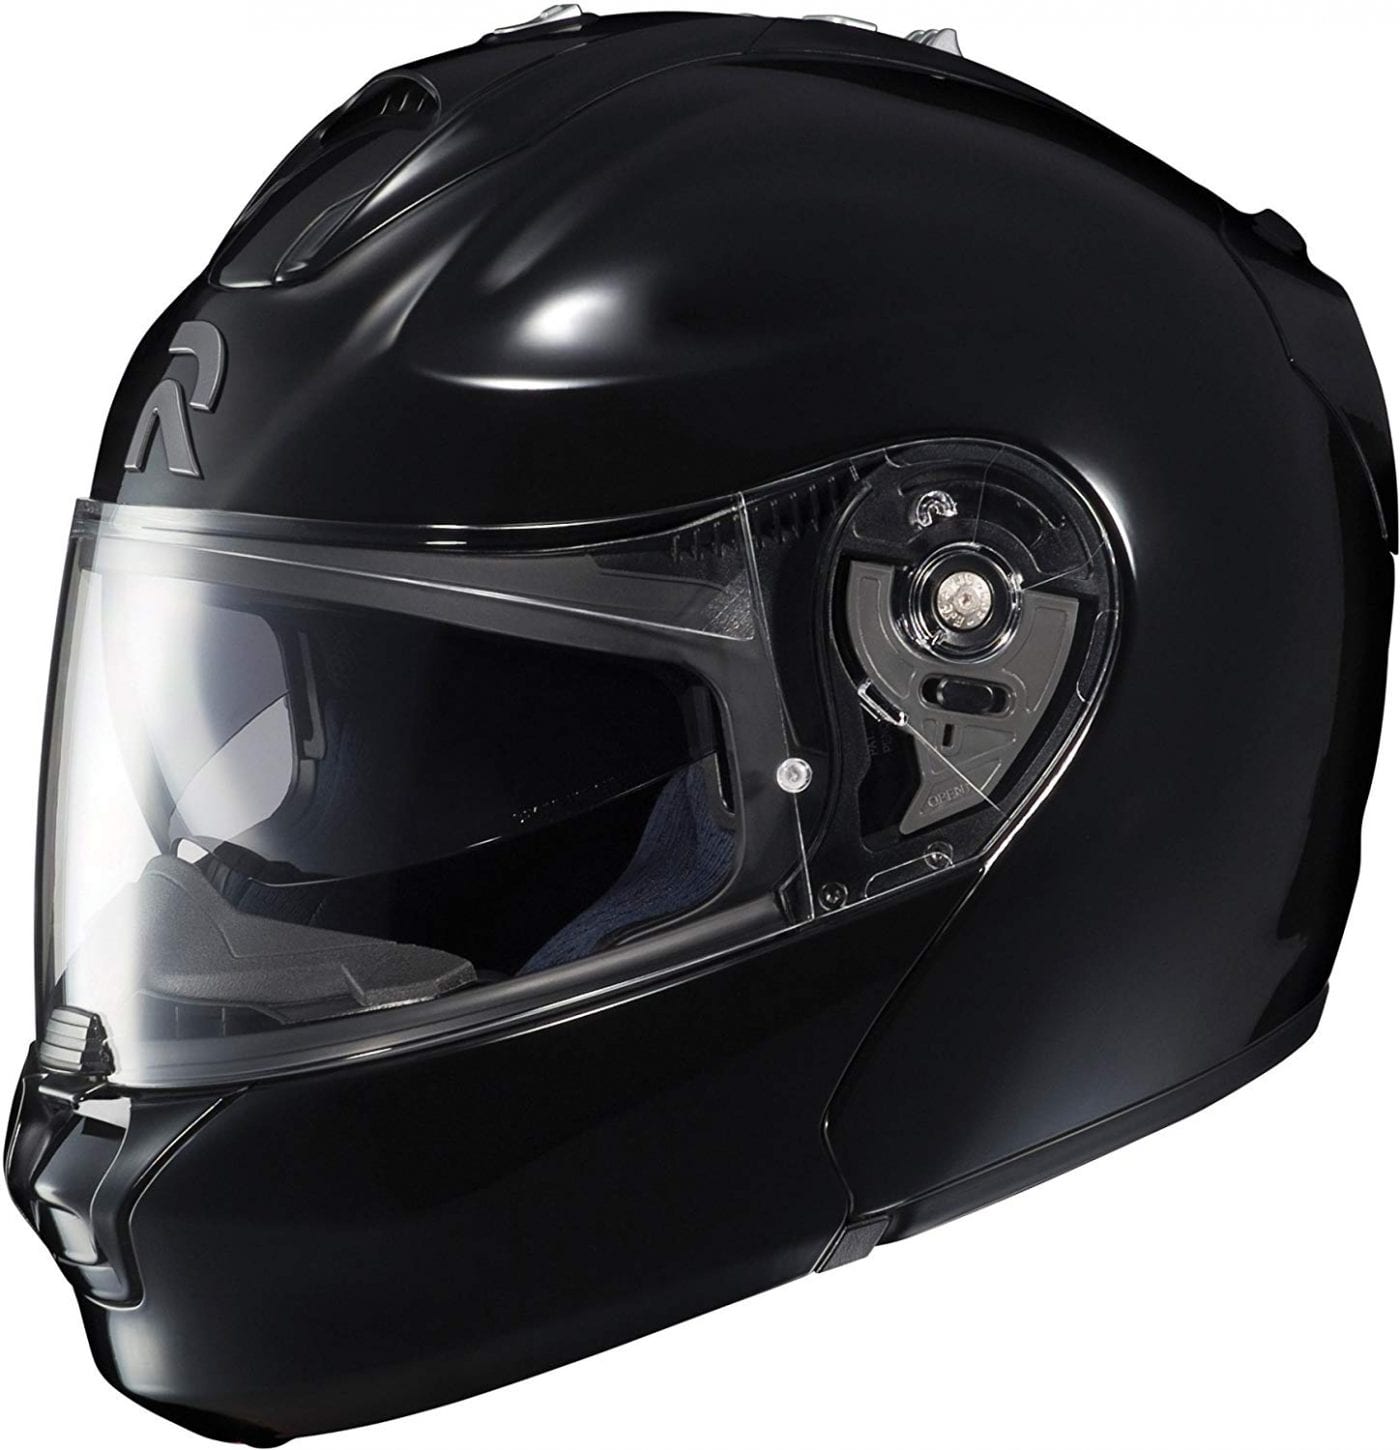 Top 8 Modular Motorcycle Helmets Which one is the BEST?